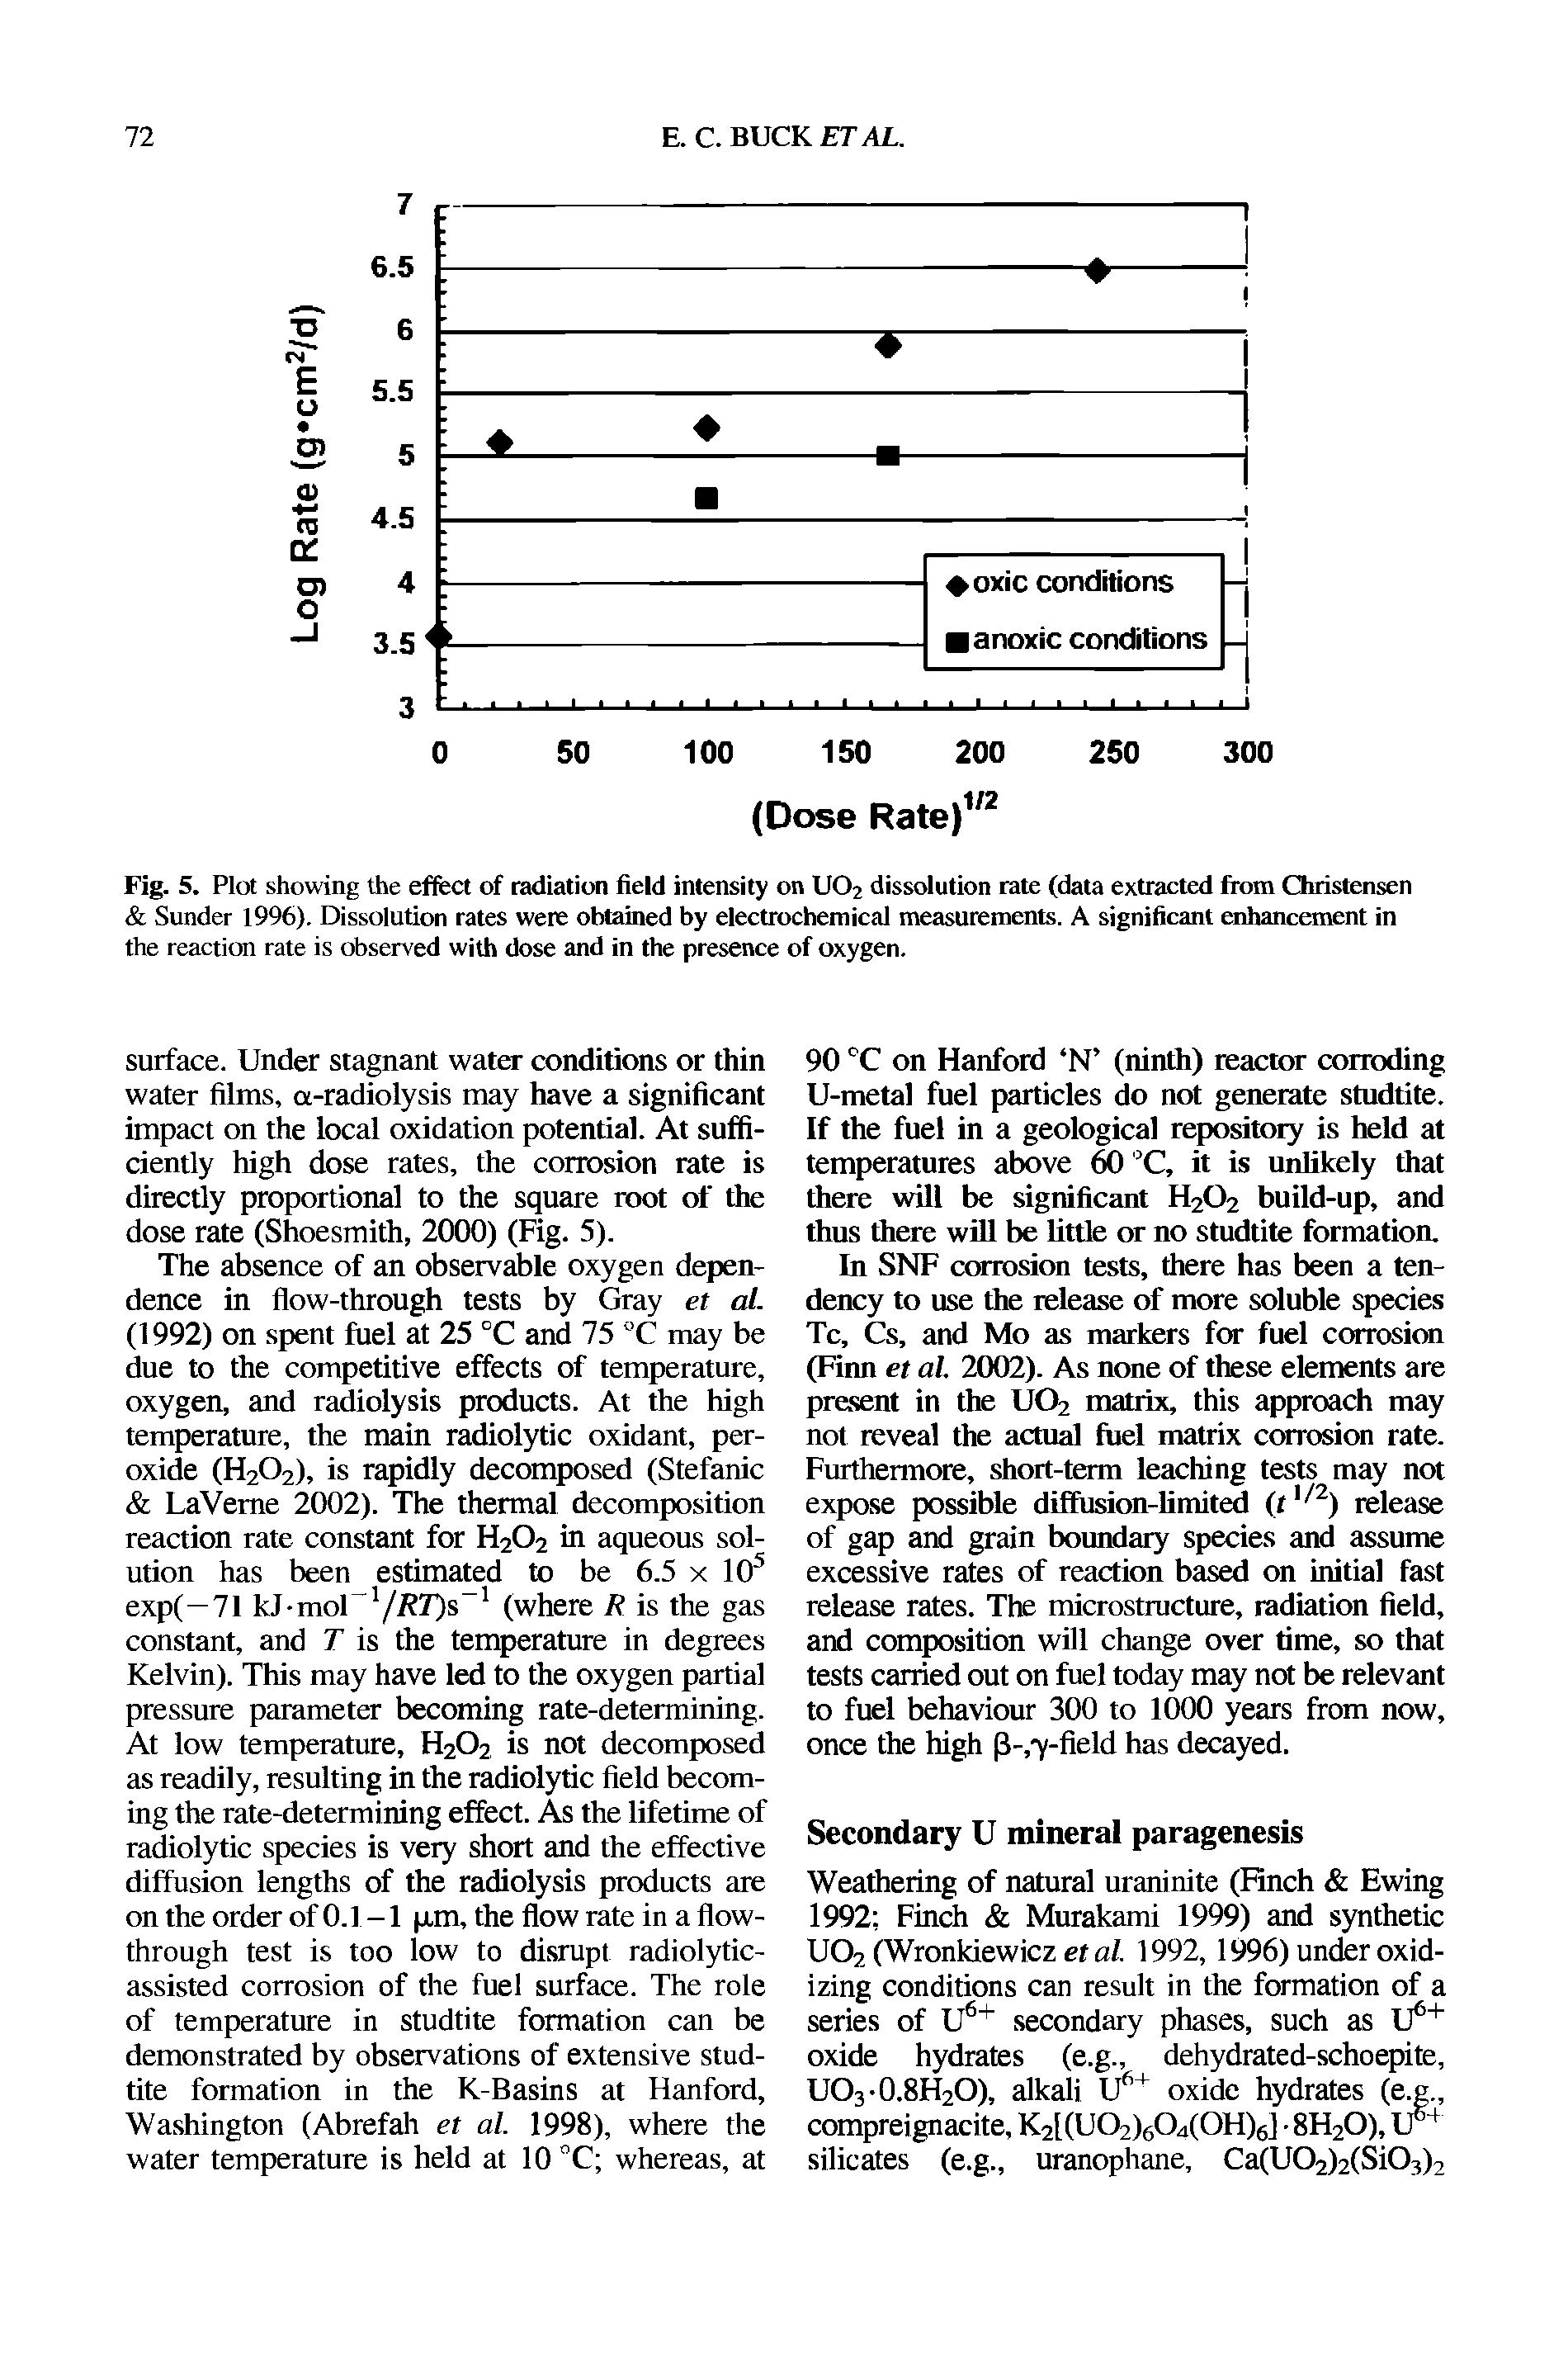 Fig. 5. Plot showing the effect of radiation field intensity on U02 dissolution rate (data extracted from Christensen Sunder 1996). Dissolution rates were obtained by electrochemical measurements. A significant enhancement in the reaction rate is observed with dose and in the presence of oxygen.